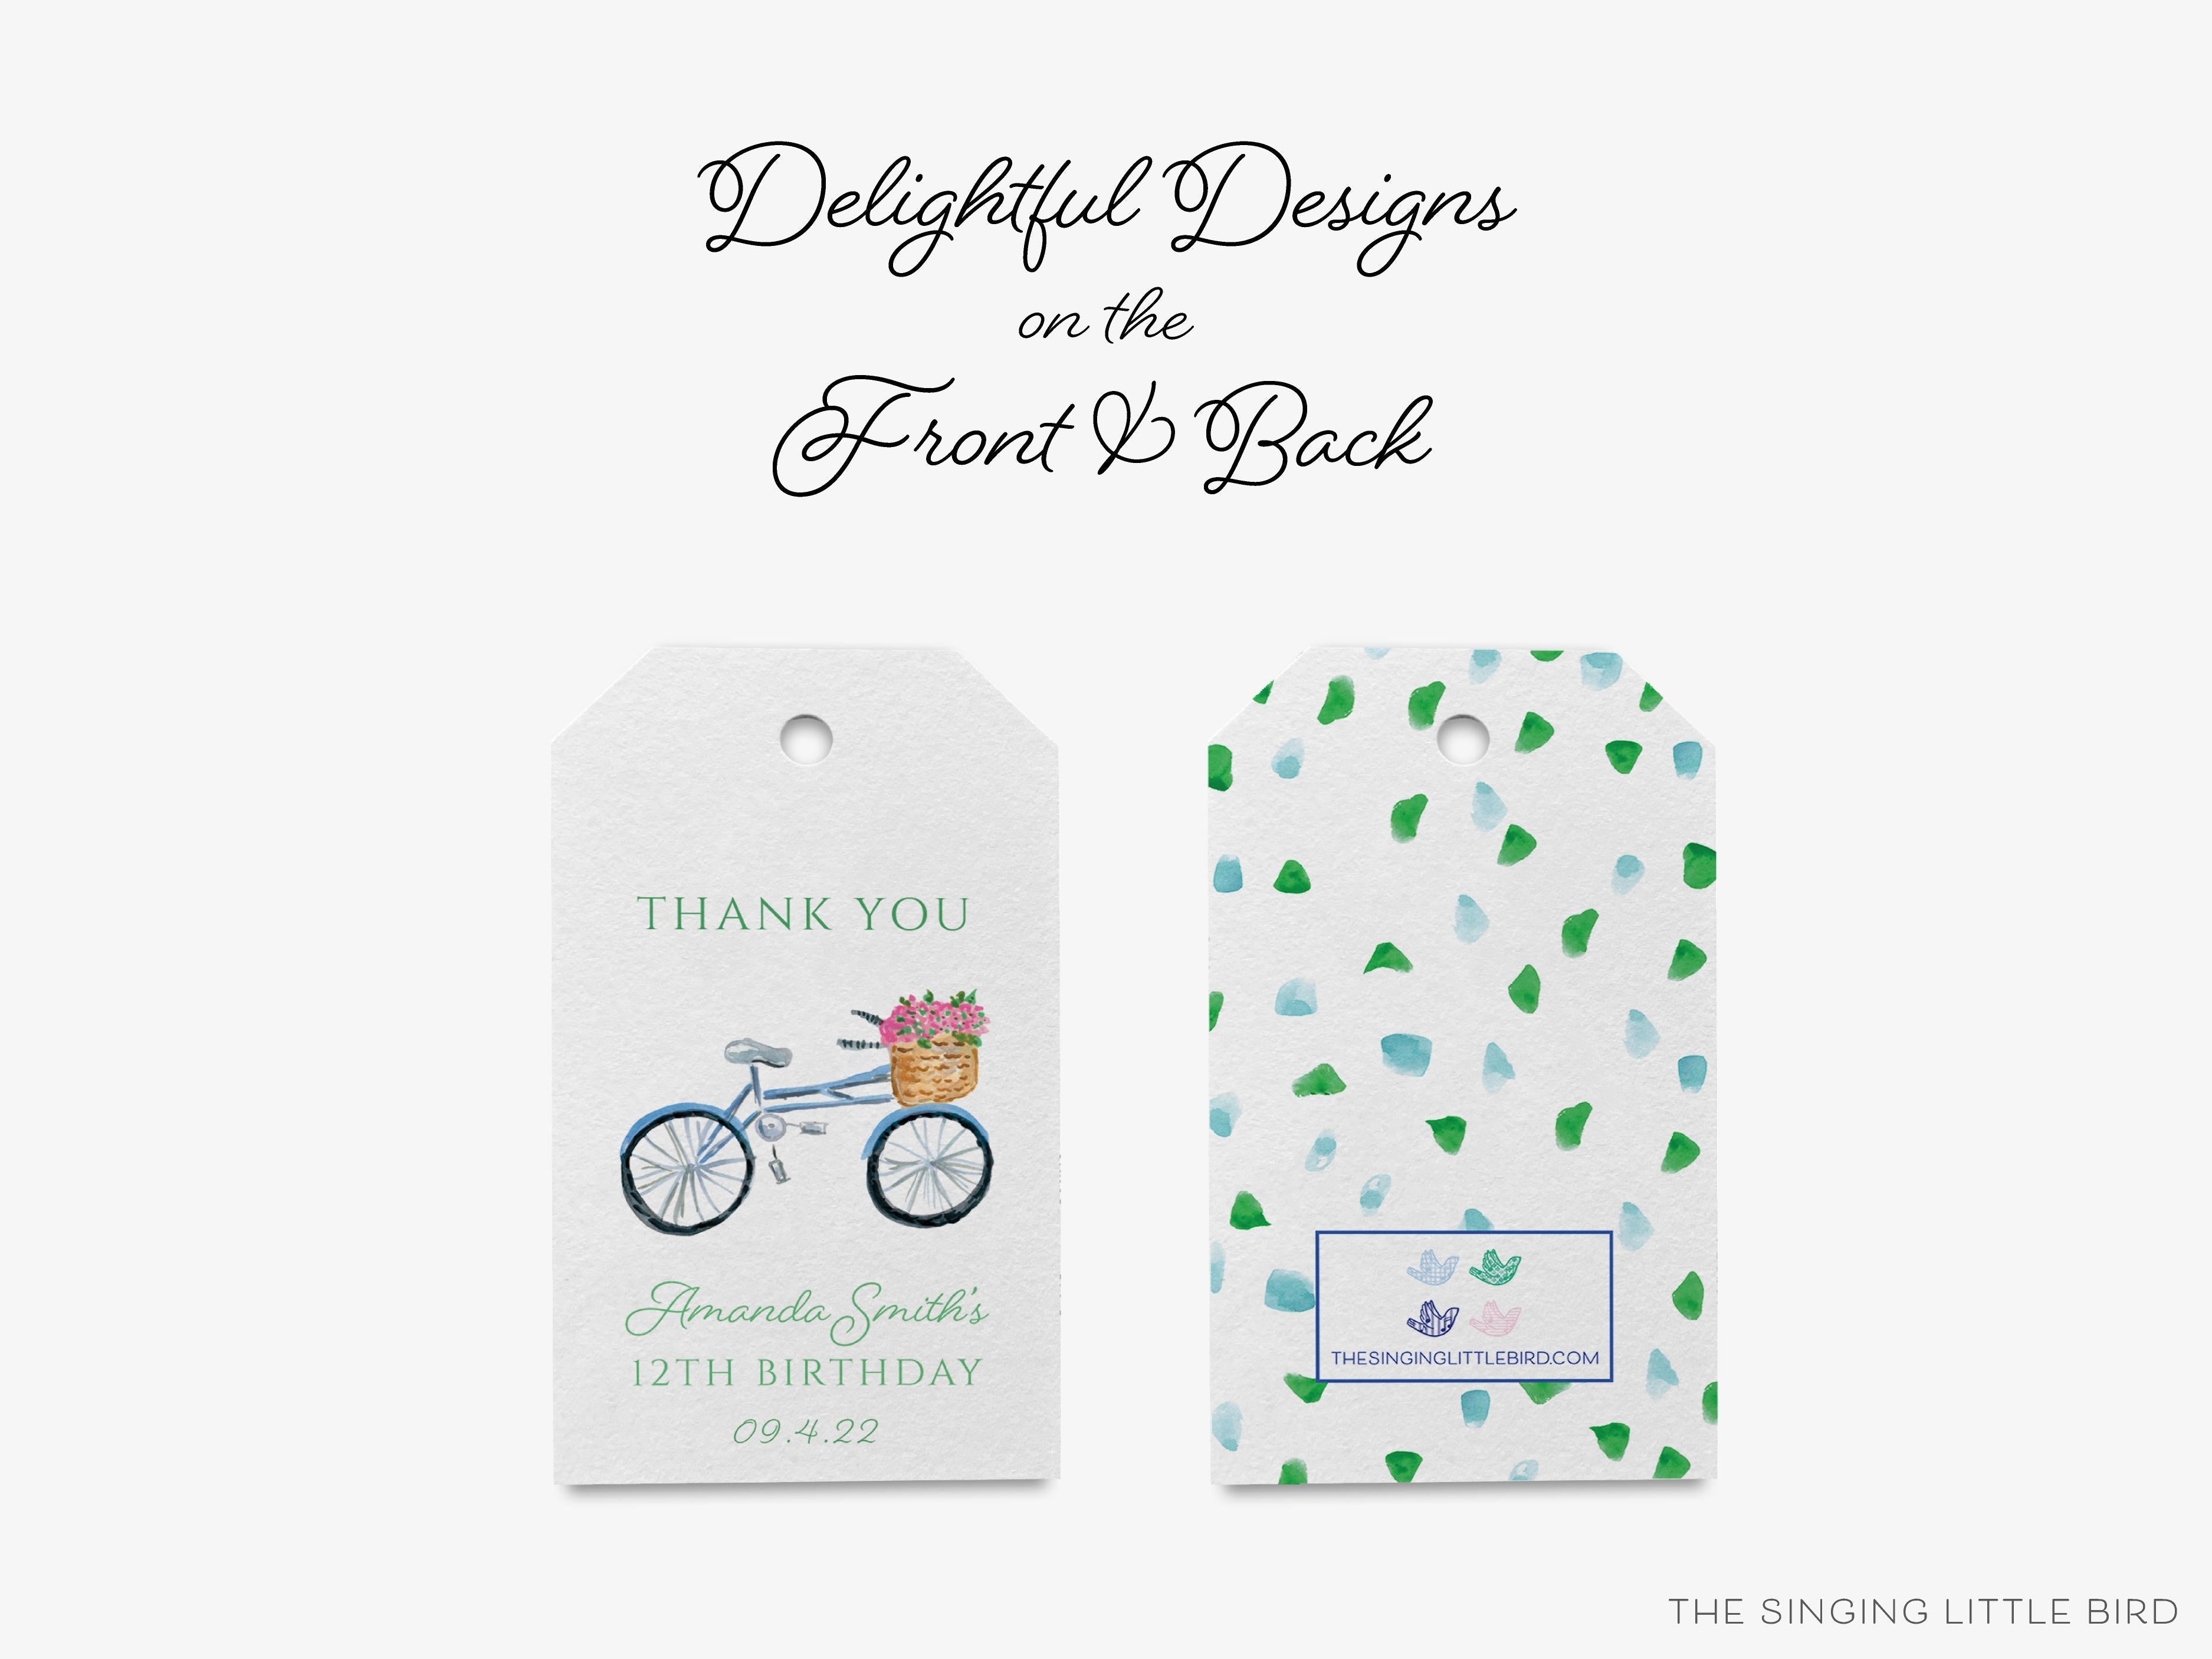 Personalized Bicycle Favor Tags-These gift tags come in sets, hole-punched with white twine and feature our hand-painted watercolor bicycle with basket of flowers, printed in the USA on 120lb textured stock. They make great tags for gifting or gifts for the bike lover in your life.-The Singing Little Bird